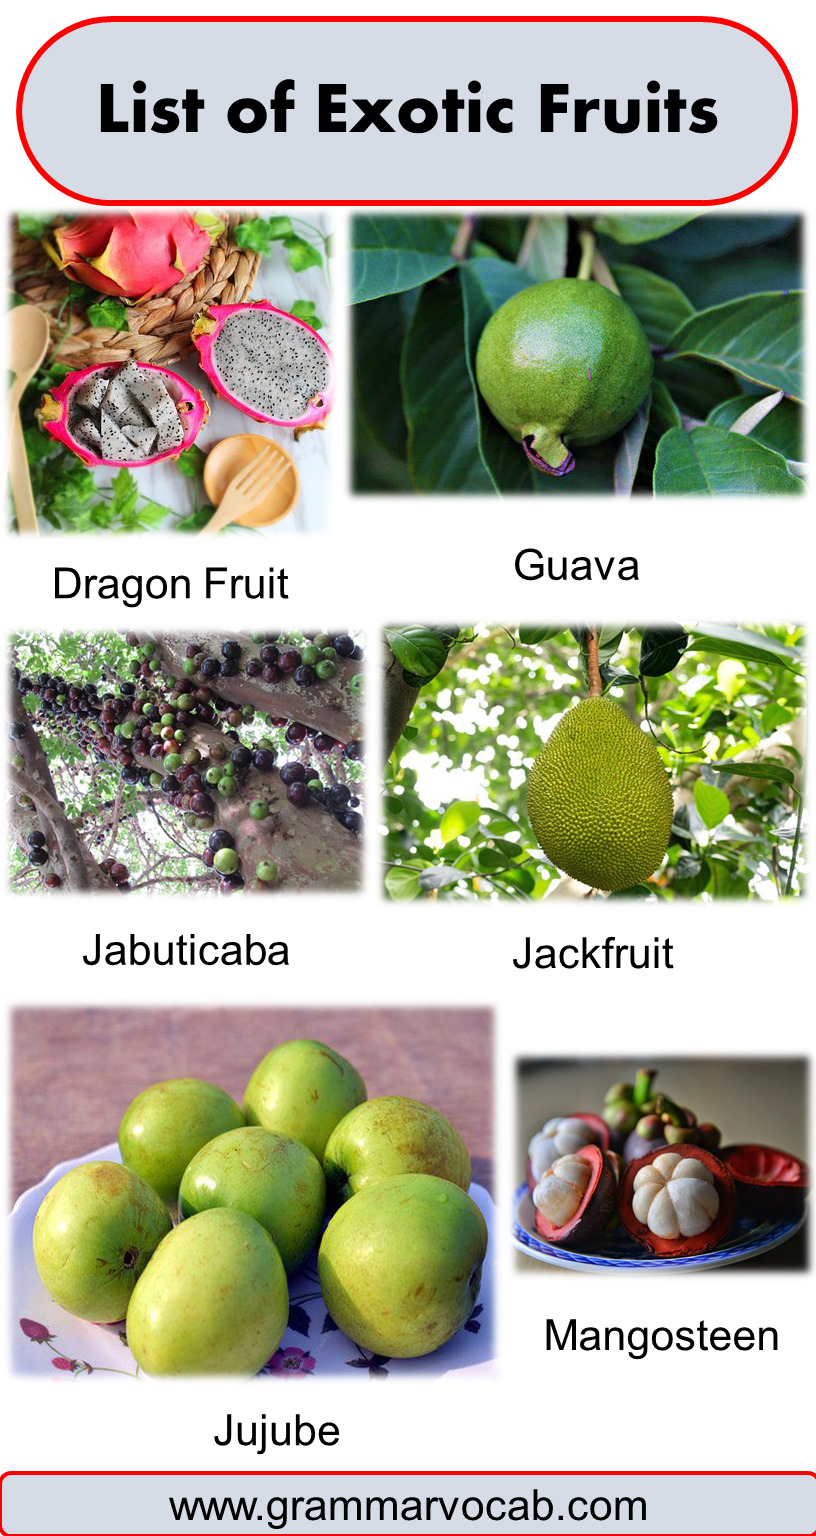 List of Exotic Fruits